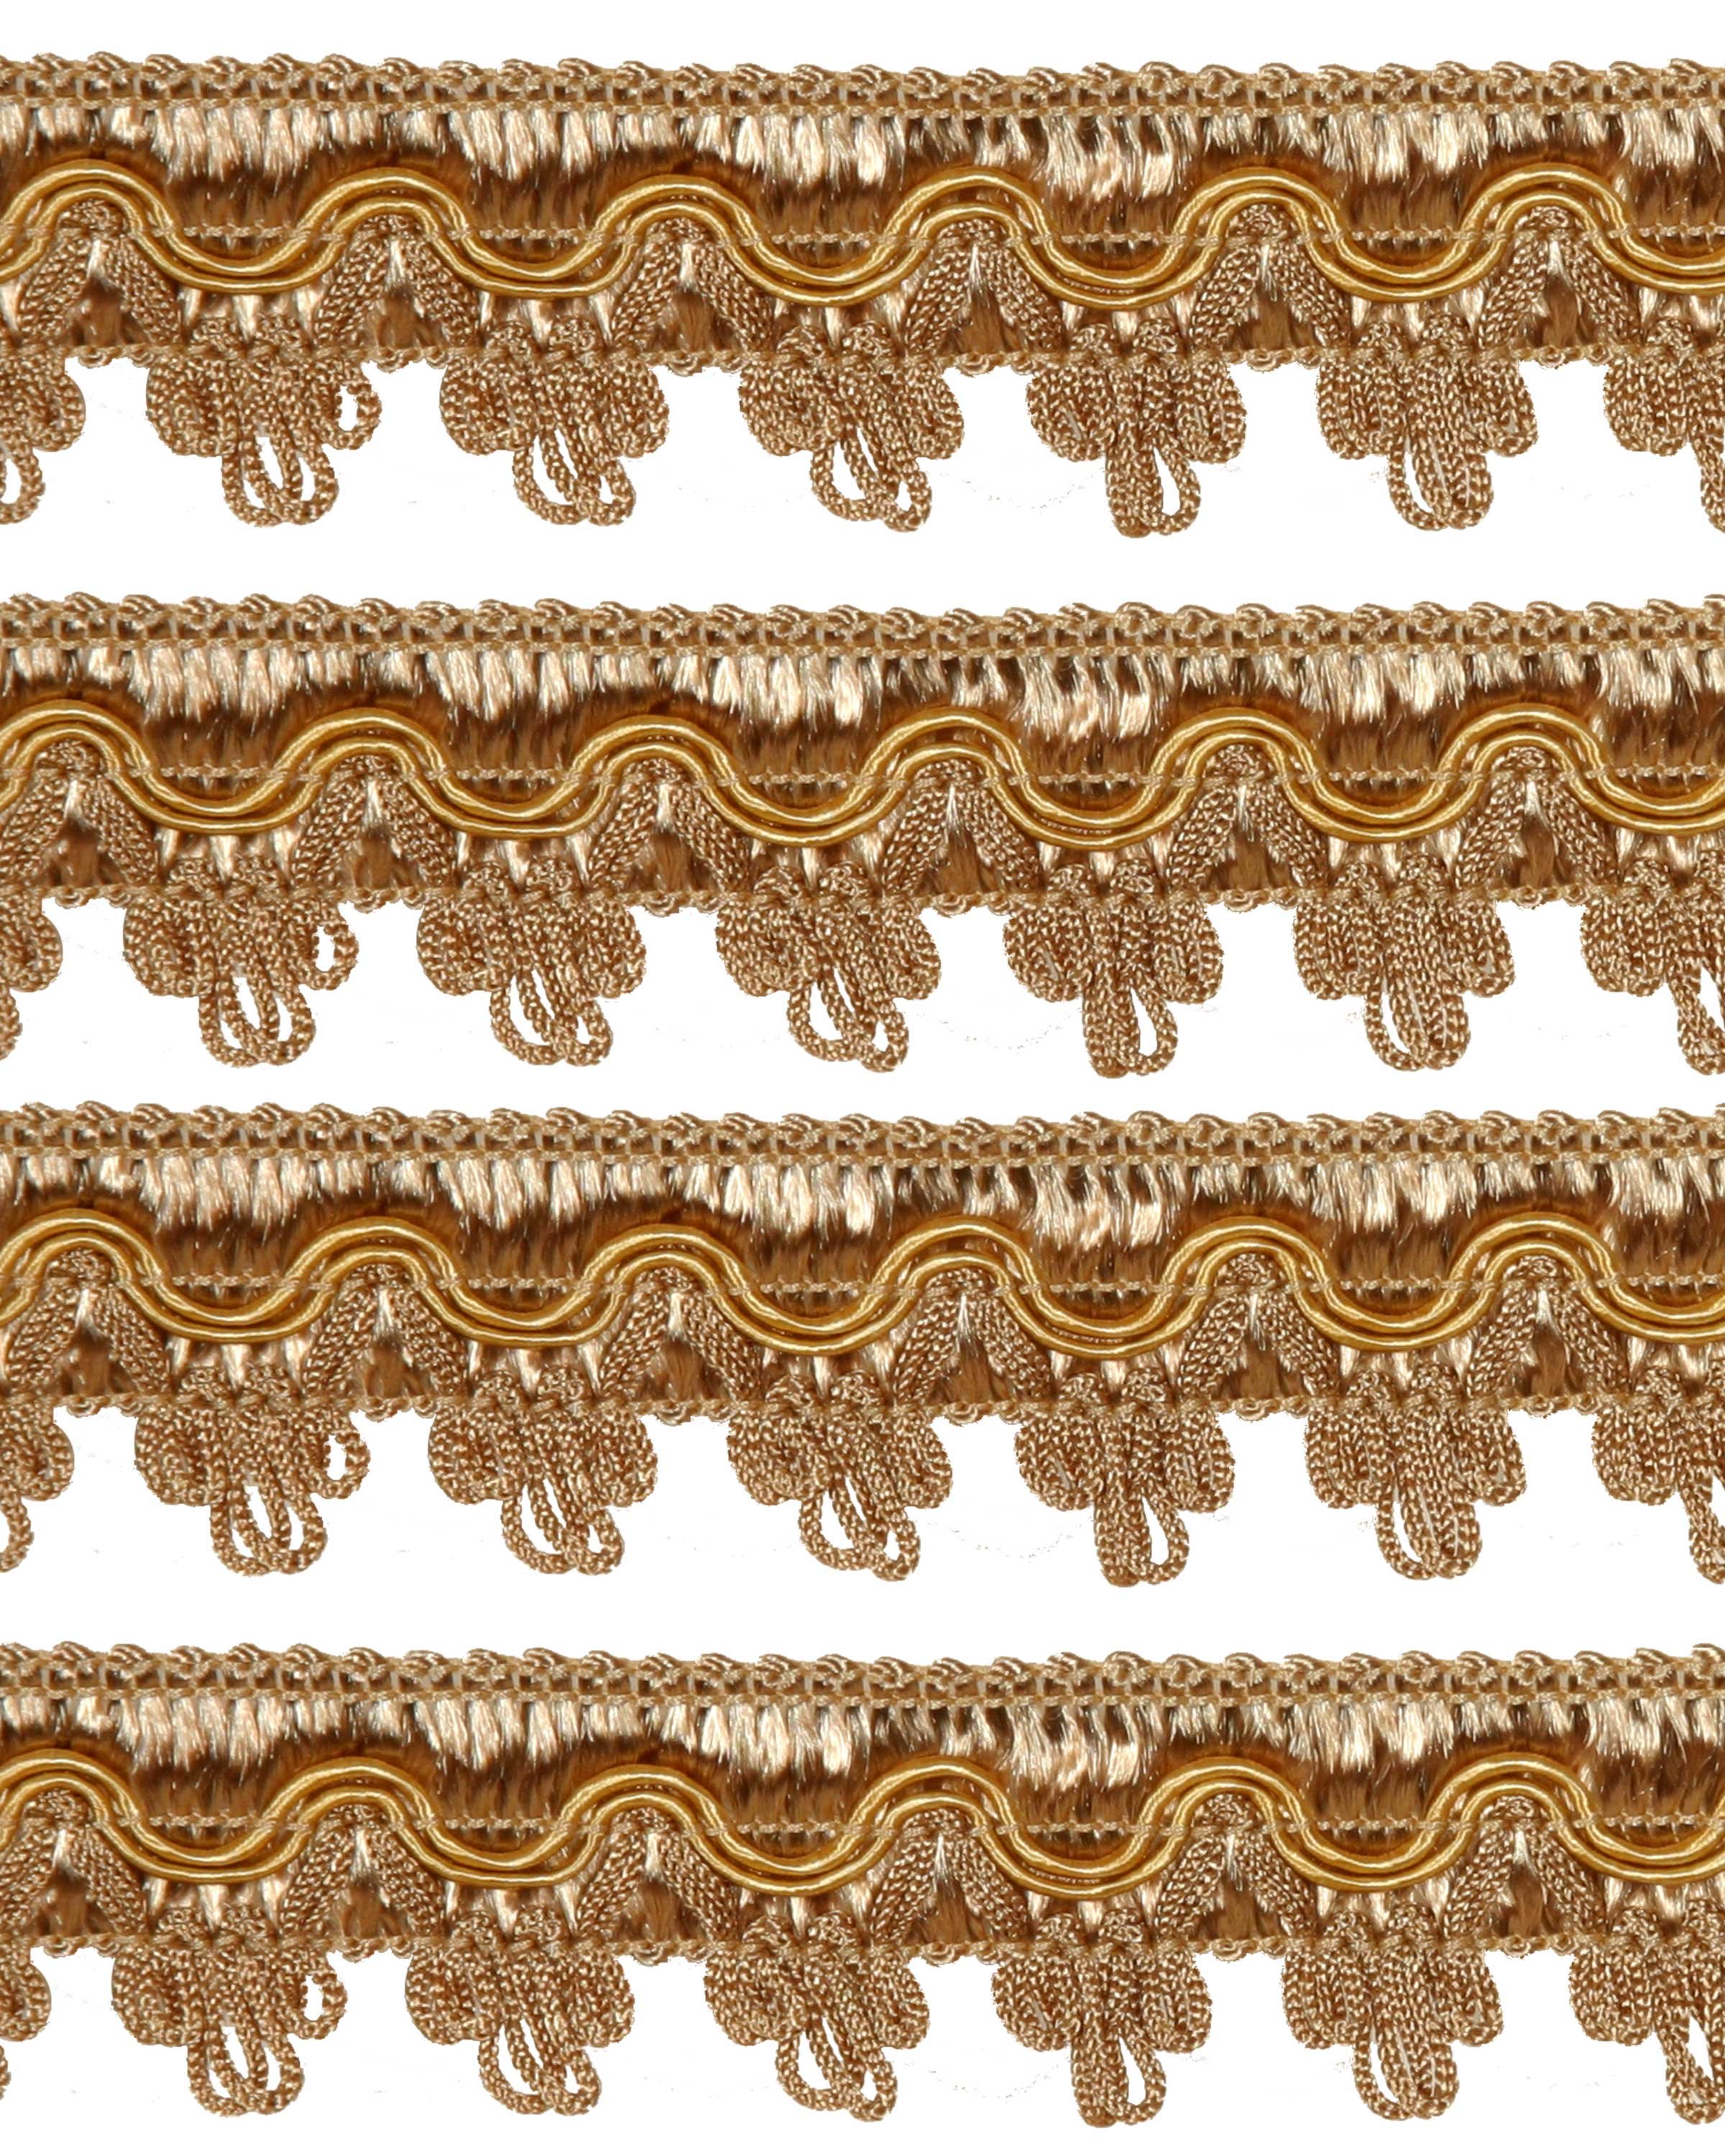 Fancy Braid - Gold 27mm Price is for 5 metres